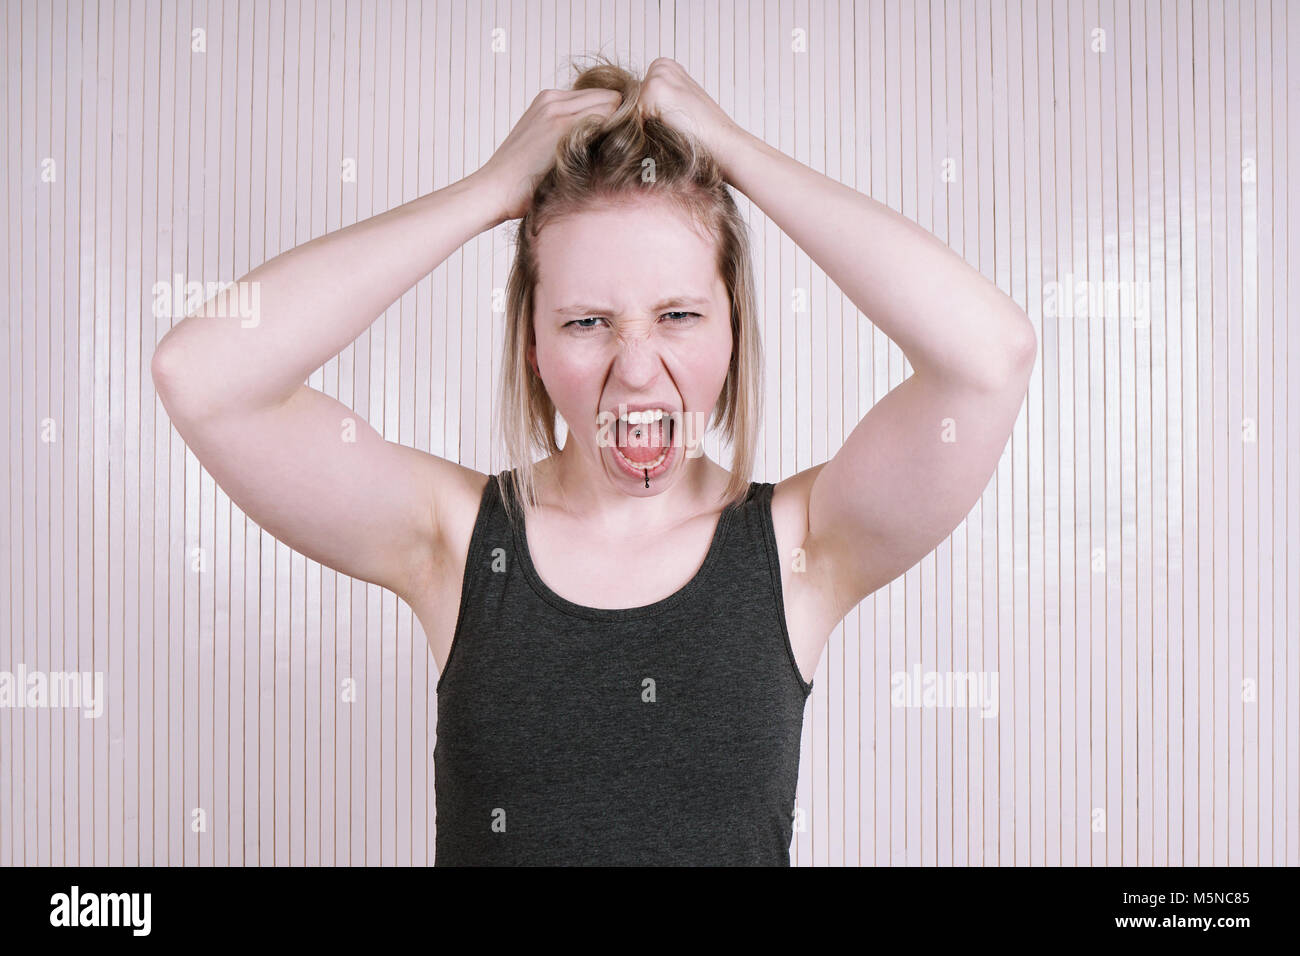 outraged young woman having a temper tantrum shouting and screaming Stock Photo